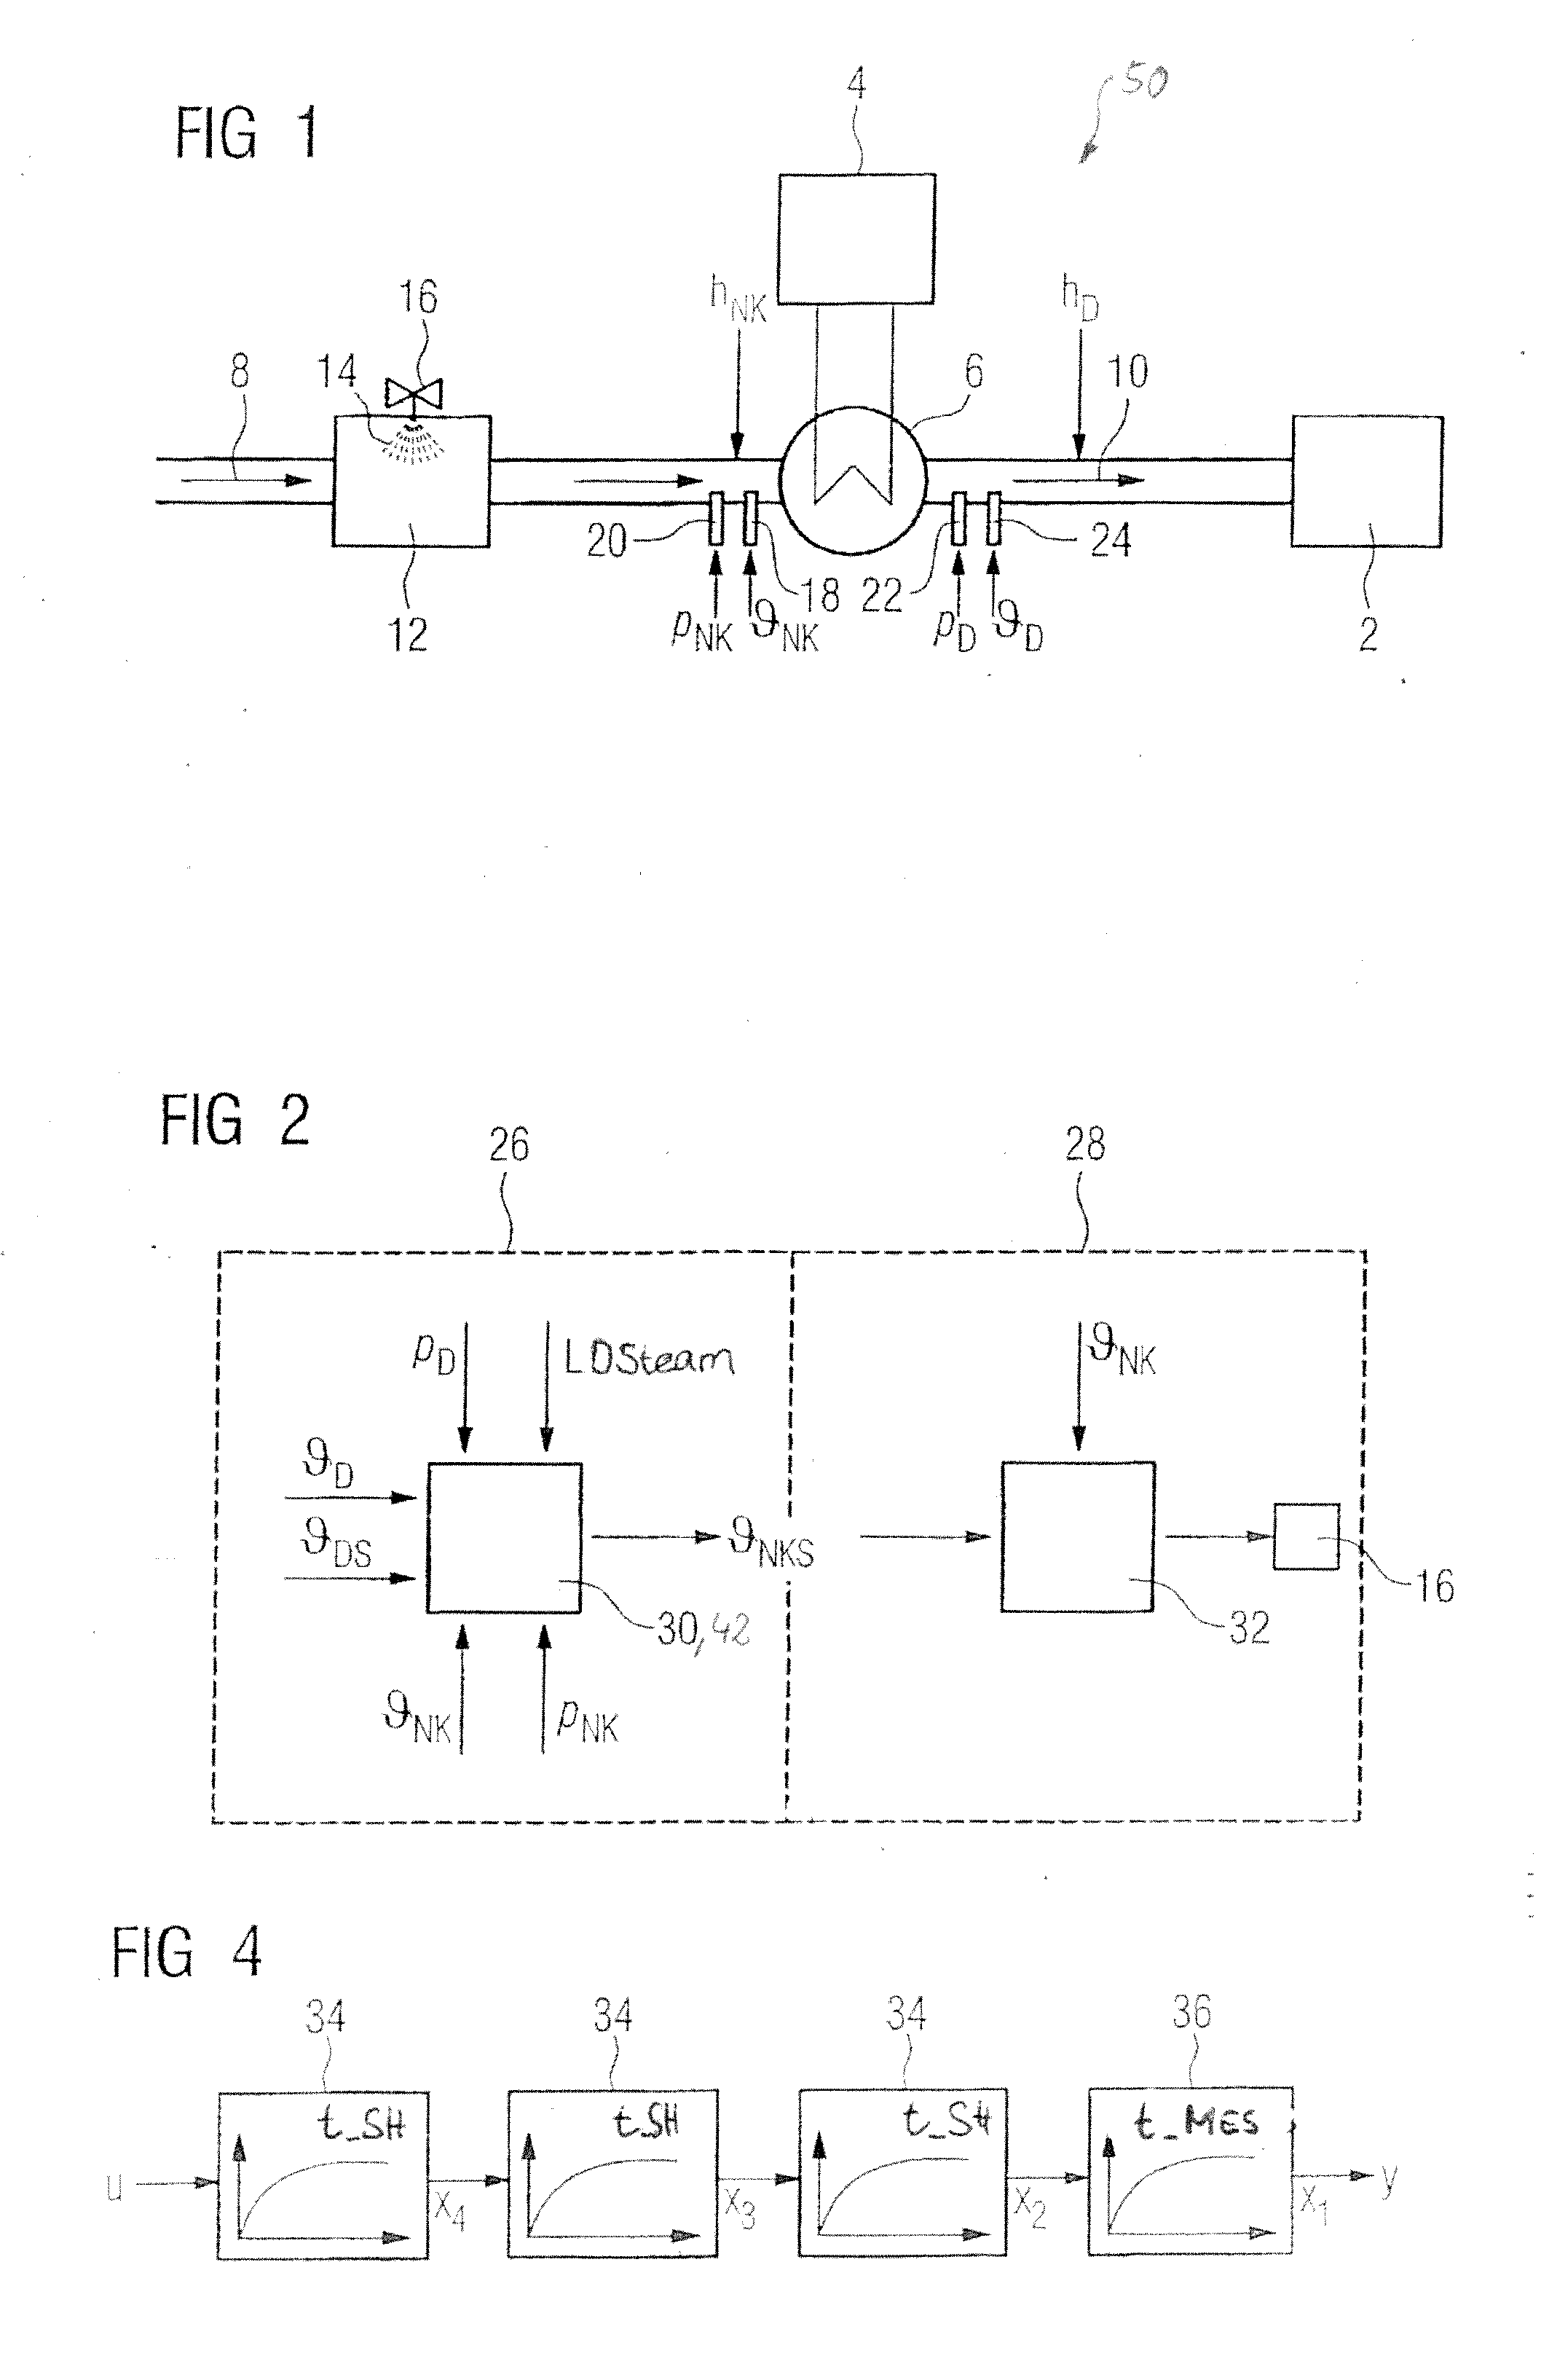 Method and device for controlling a temperature of steam for a steam power plant